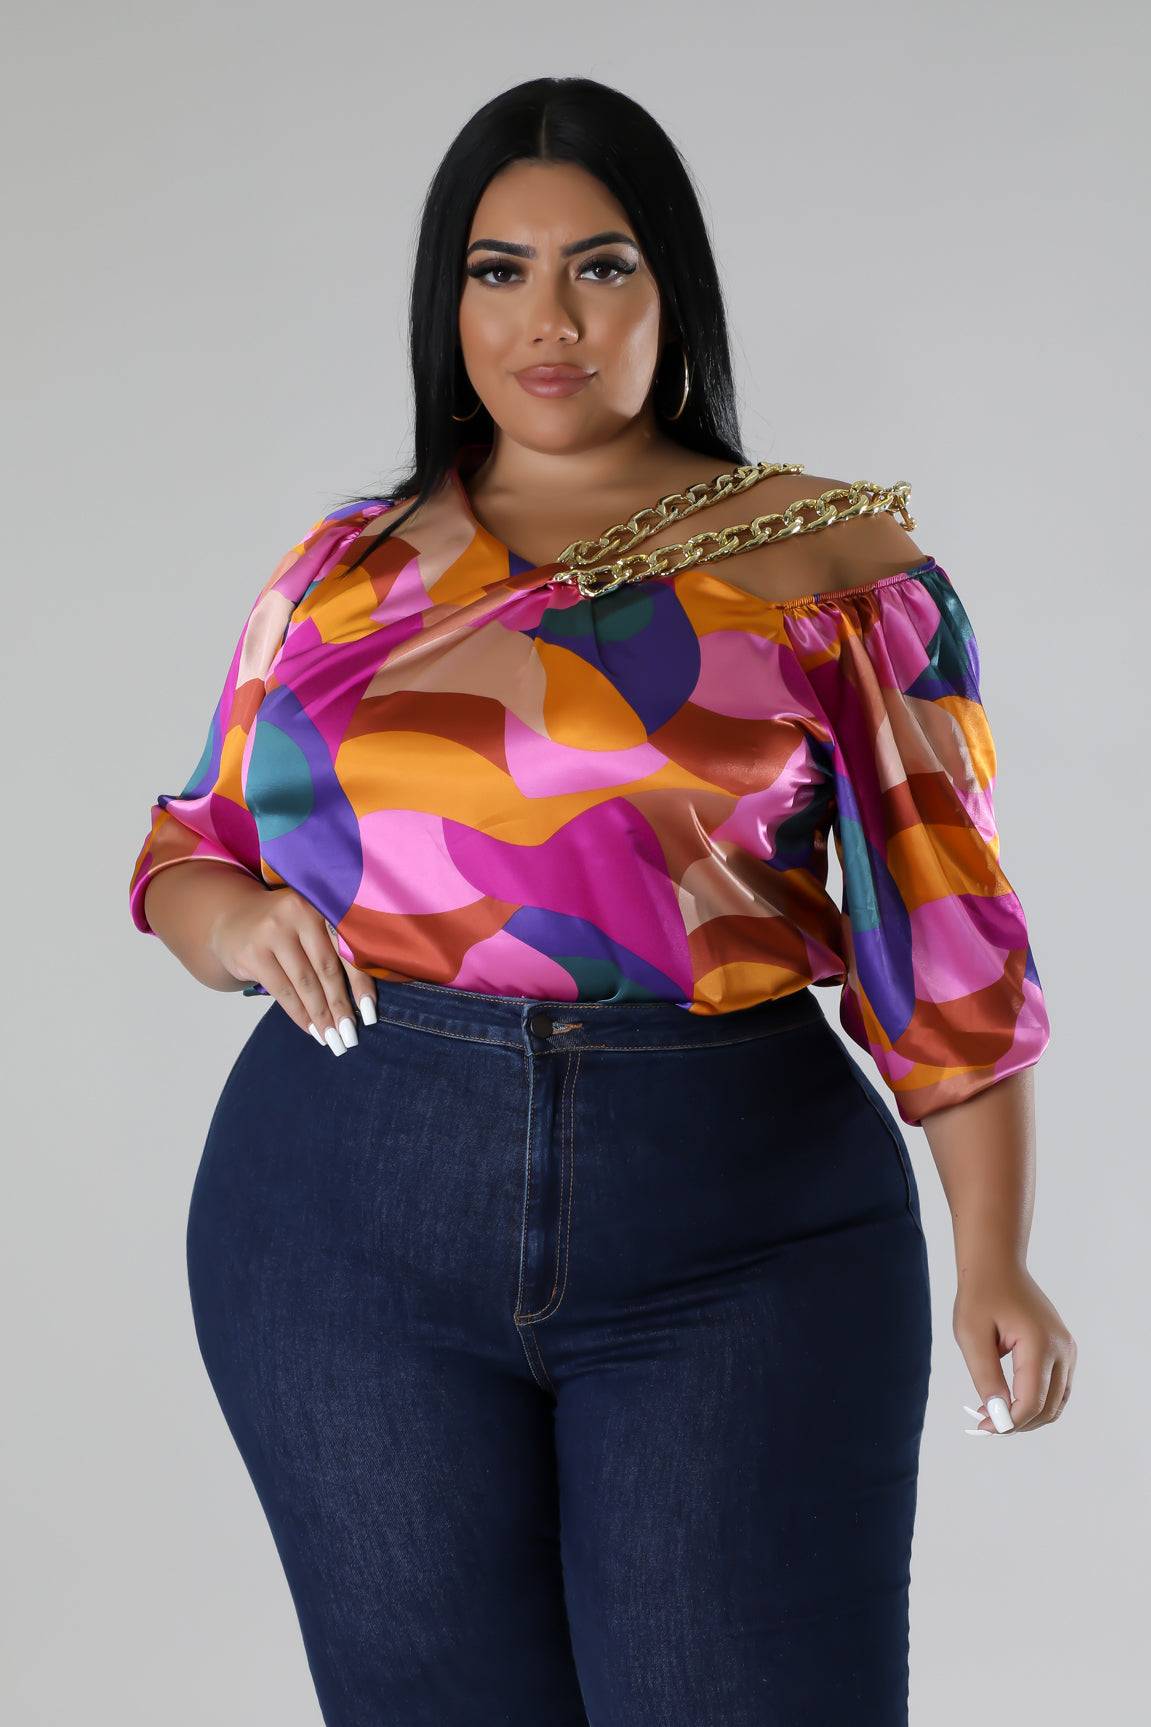 The Call You Mine Top - Plus Size